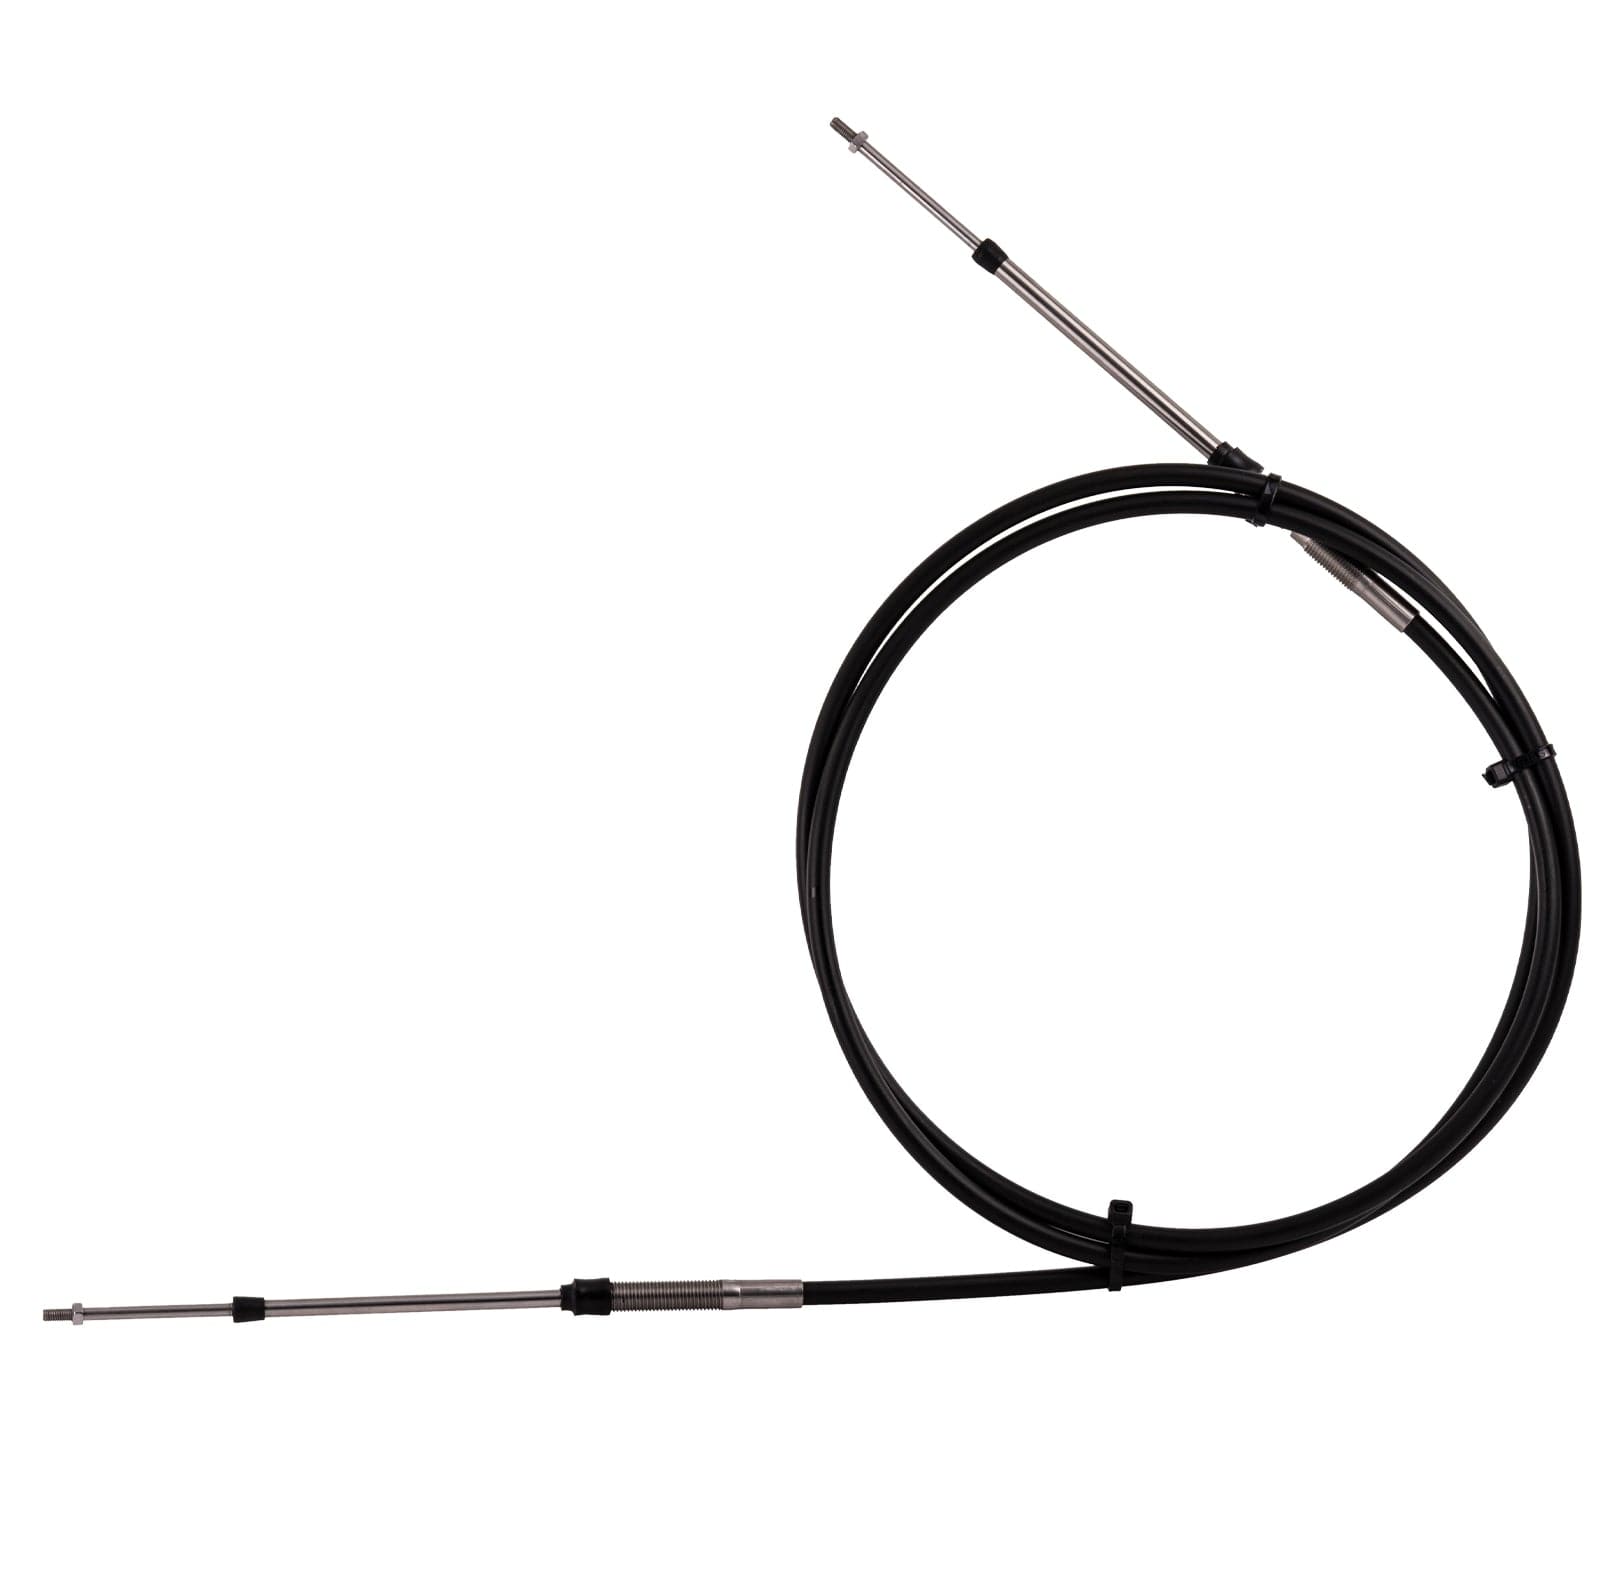 SBT Jet Boat Reverse / Shift Cable for Sea-Doo Challenger/Sportster LT (Right) 204170045